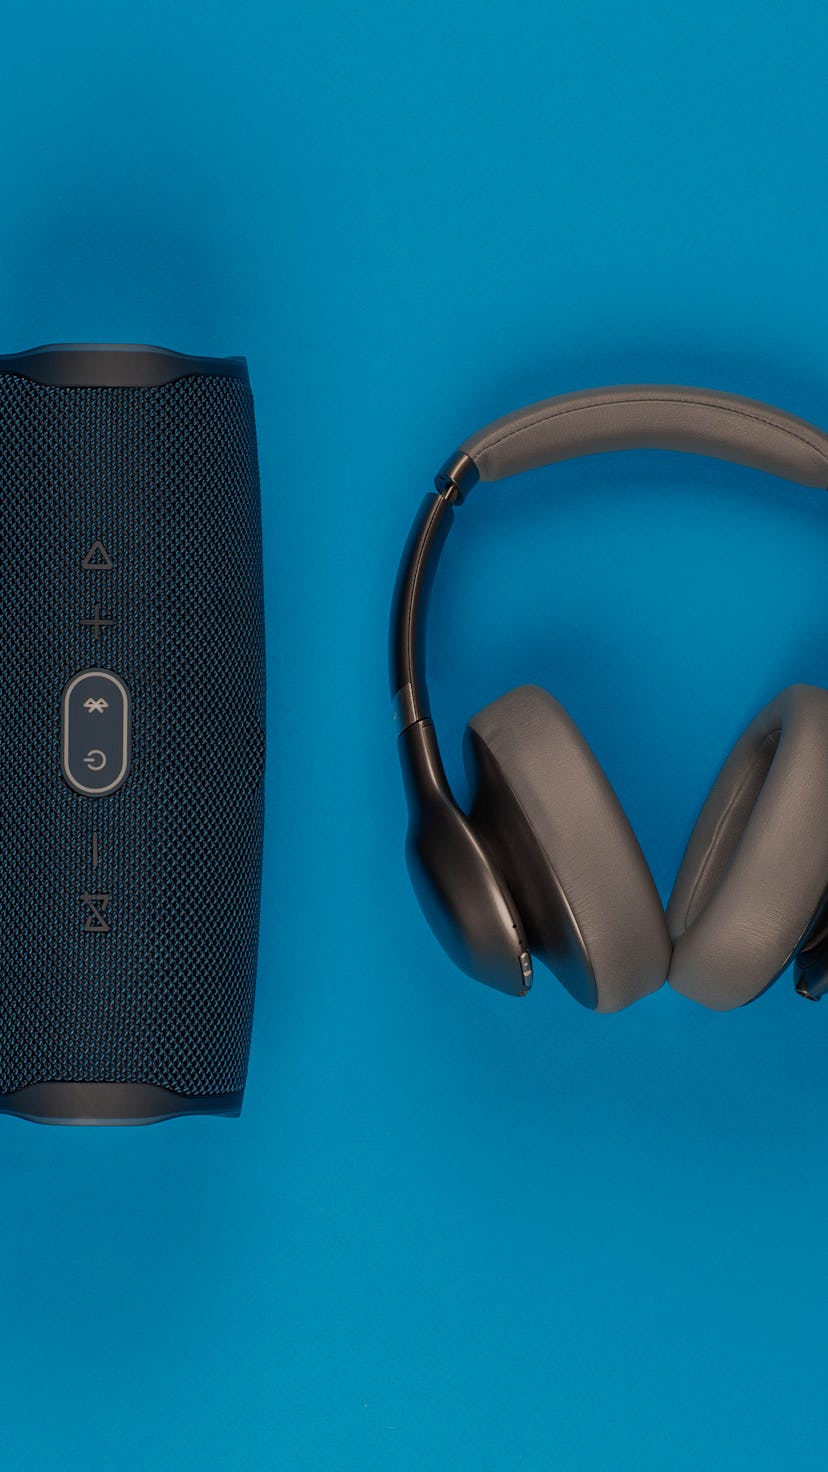 A pair of headphones next to a black speaker on blue background, shot from above.